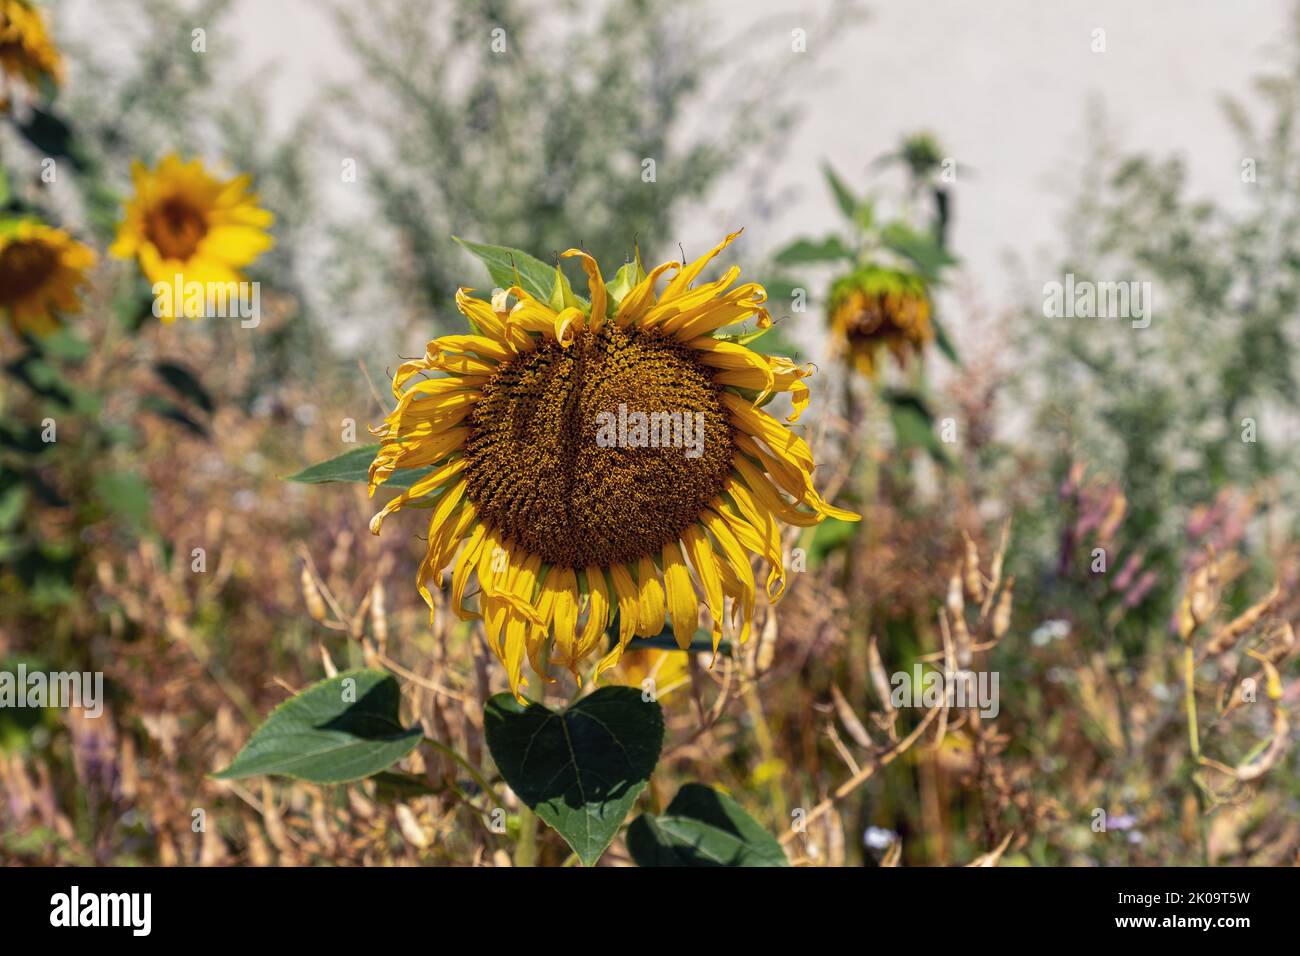 Close-up of a Sunflower on a sunny summer day Stock Photo